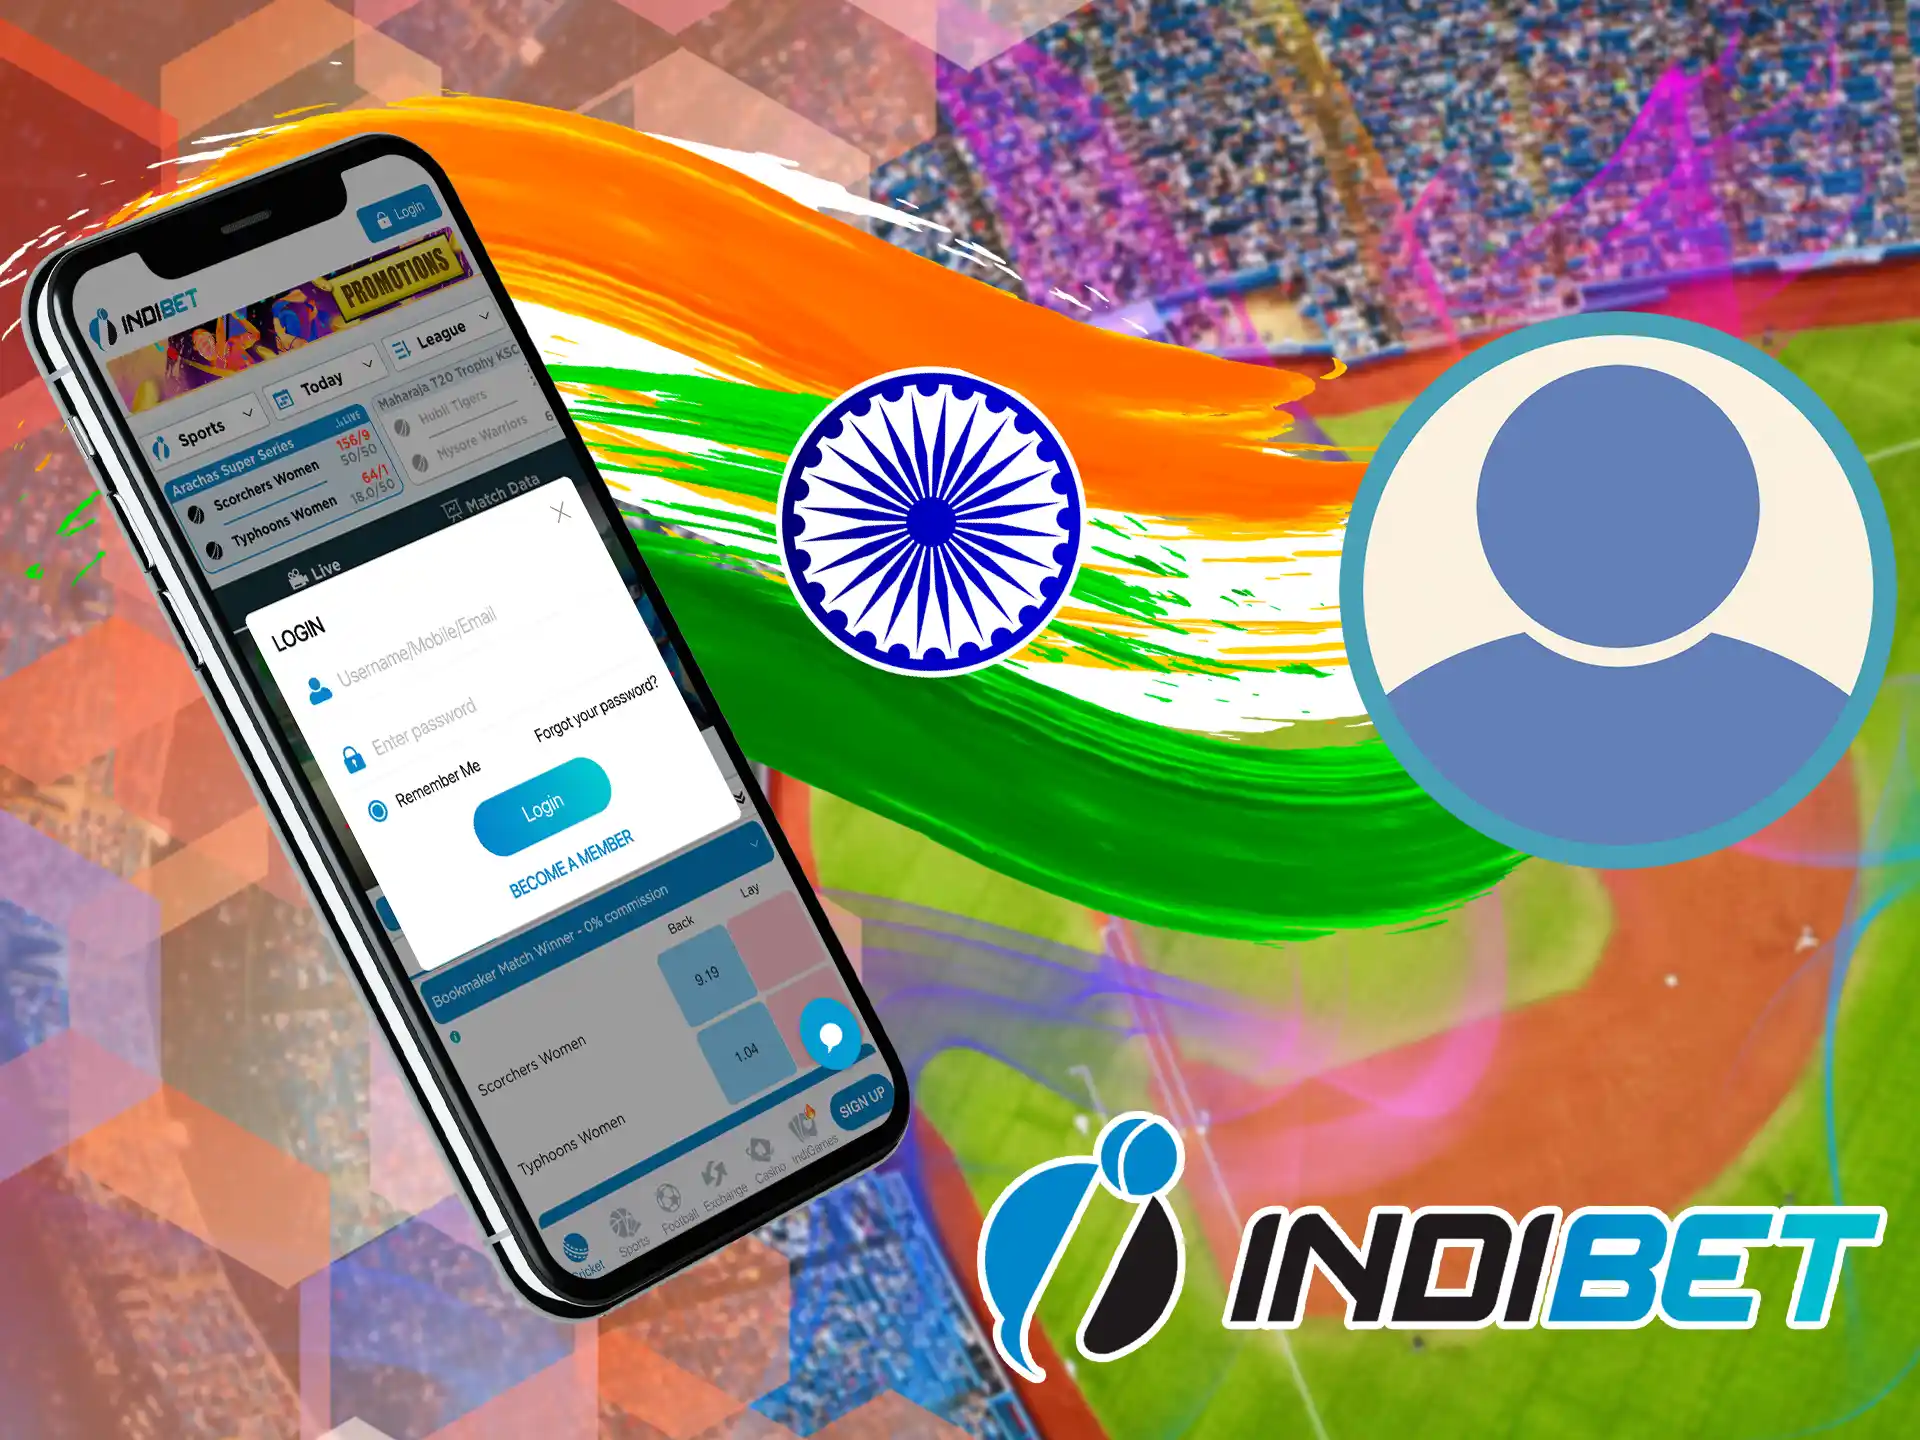 Indian punters have the option to log in to Indibet's smartphone software and place bets wherever they want.